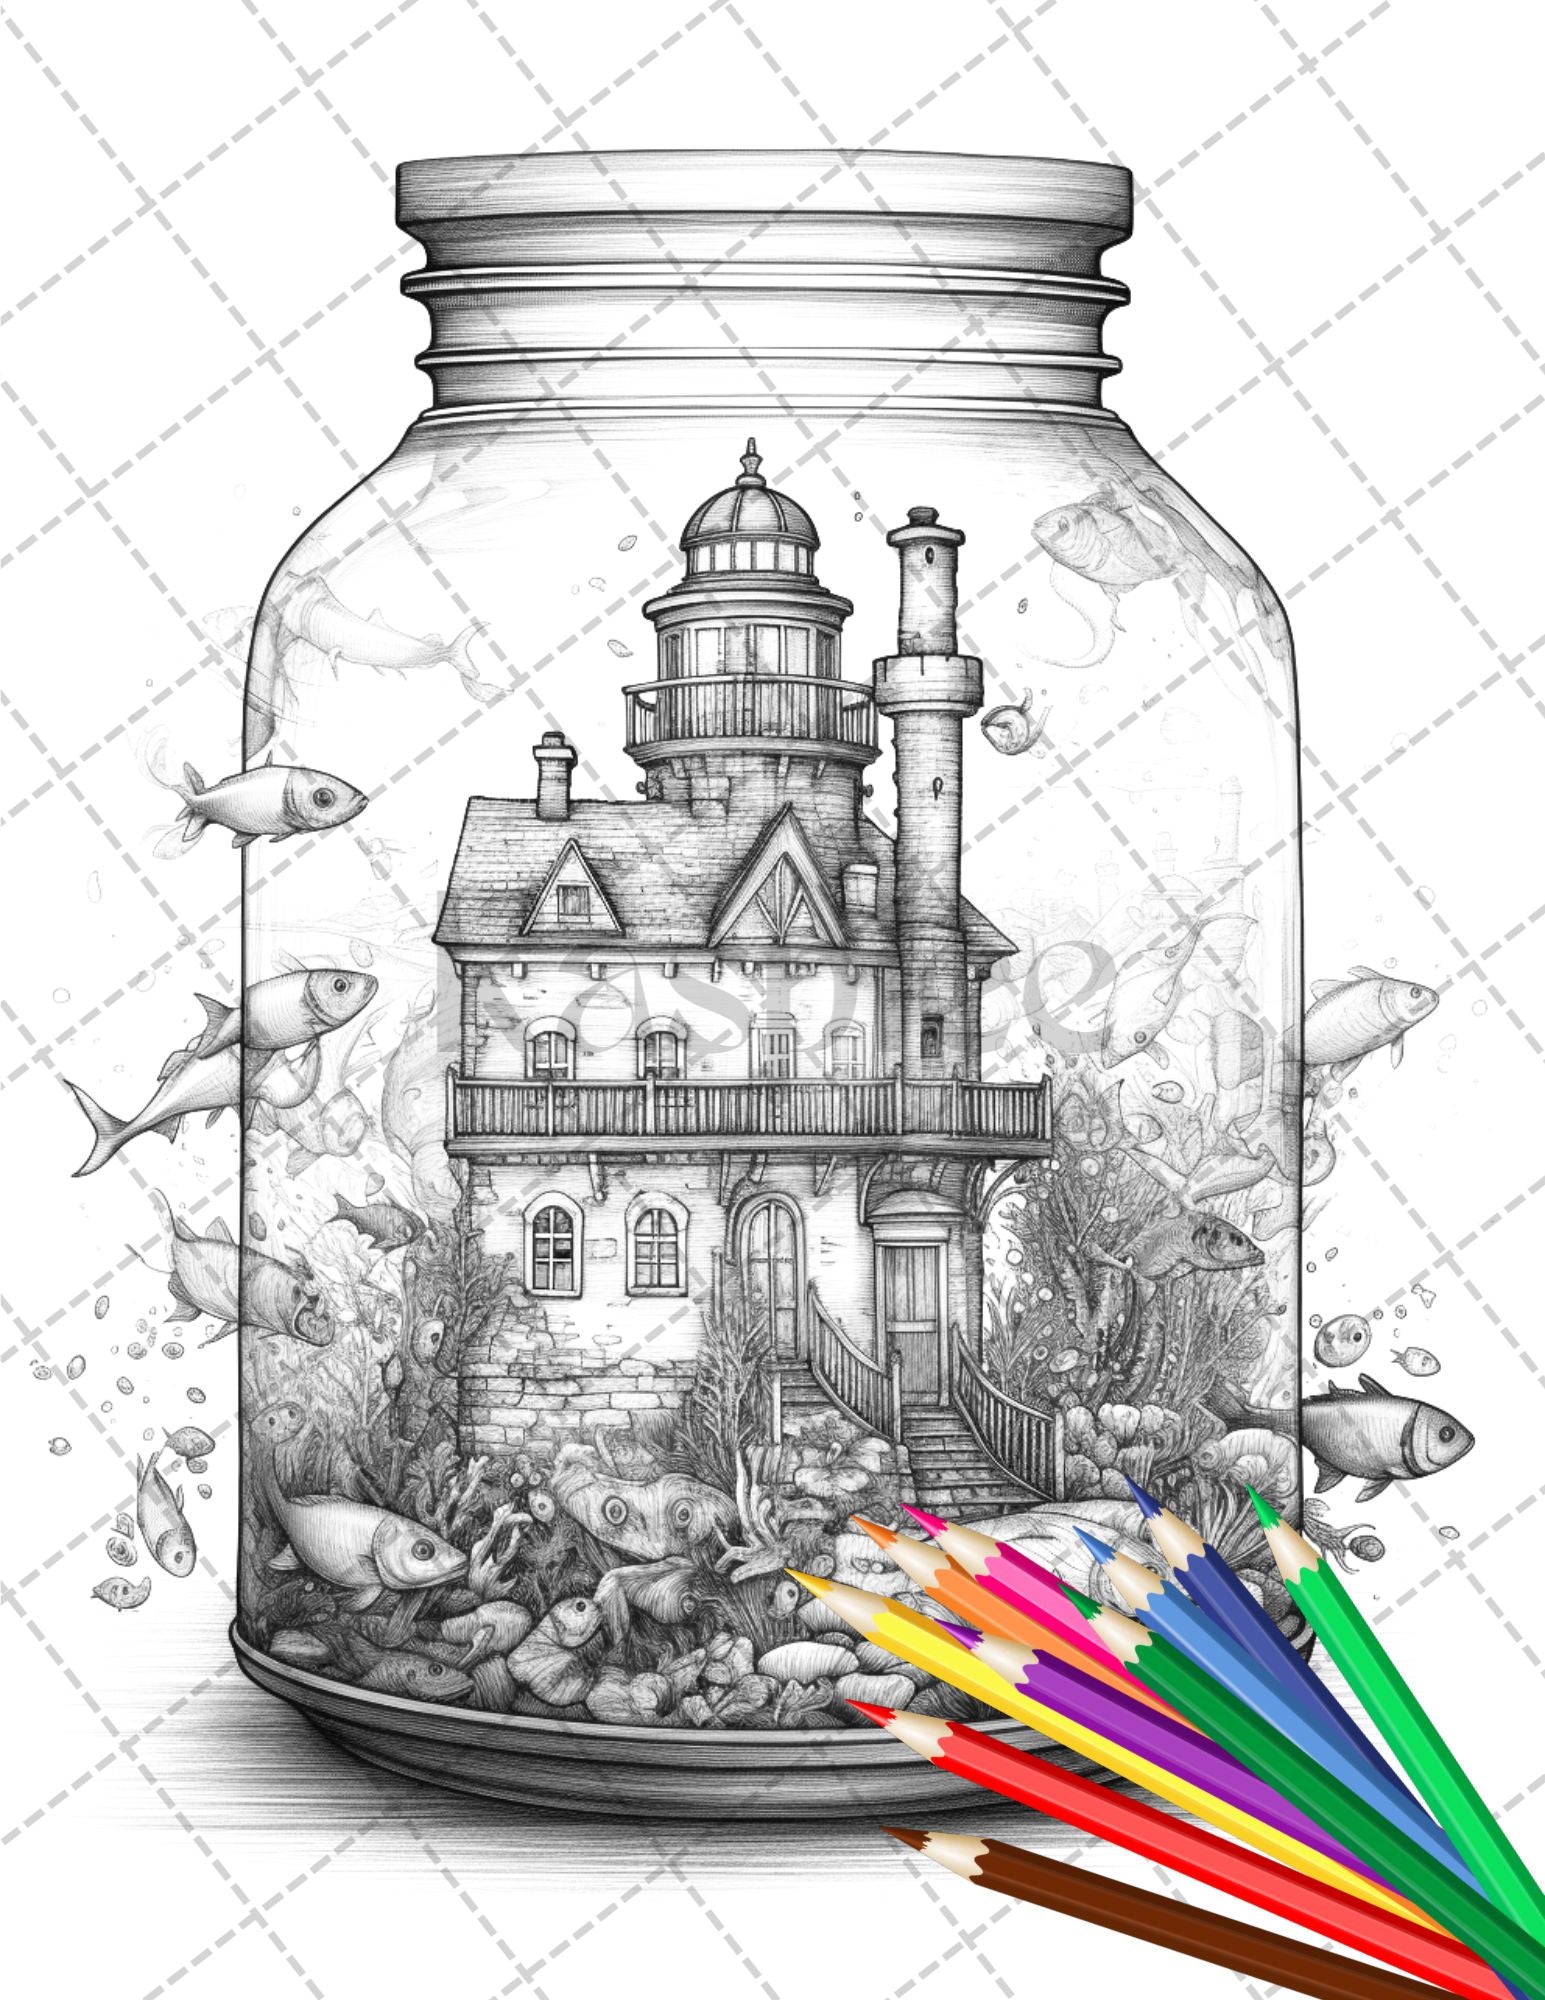 34 Fishtank Houses Coloring Book for Adults, Grayscale Coloring Page, Printable PDF Instant Download - raspiee